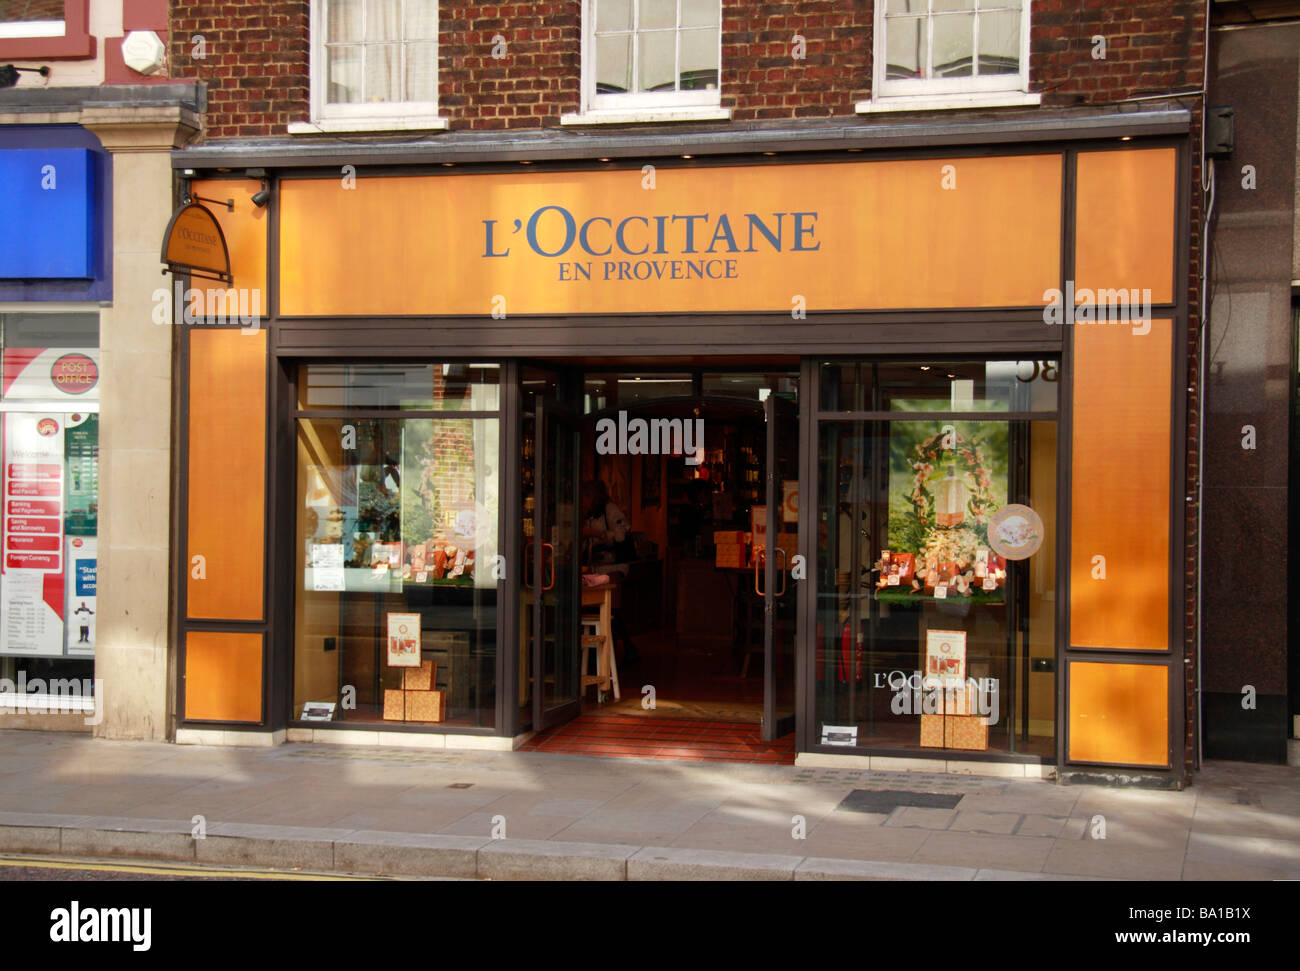 The shop front of the L'Occitane beauty products in Richmond, Surrey, UK. Mar 2009 Stock Photo